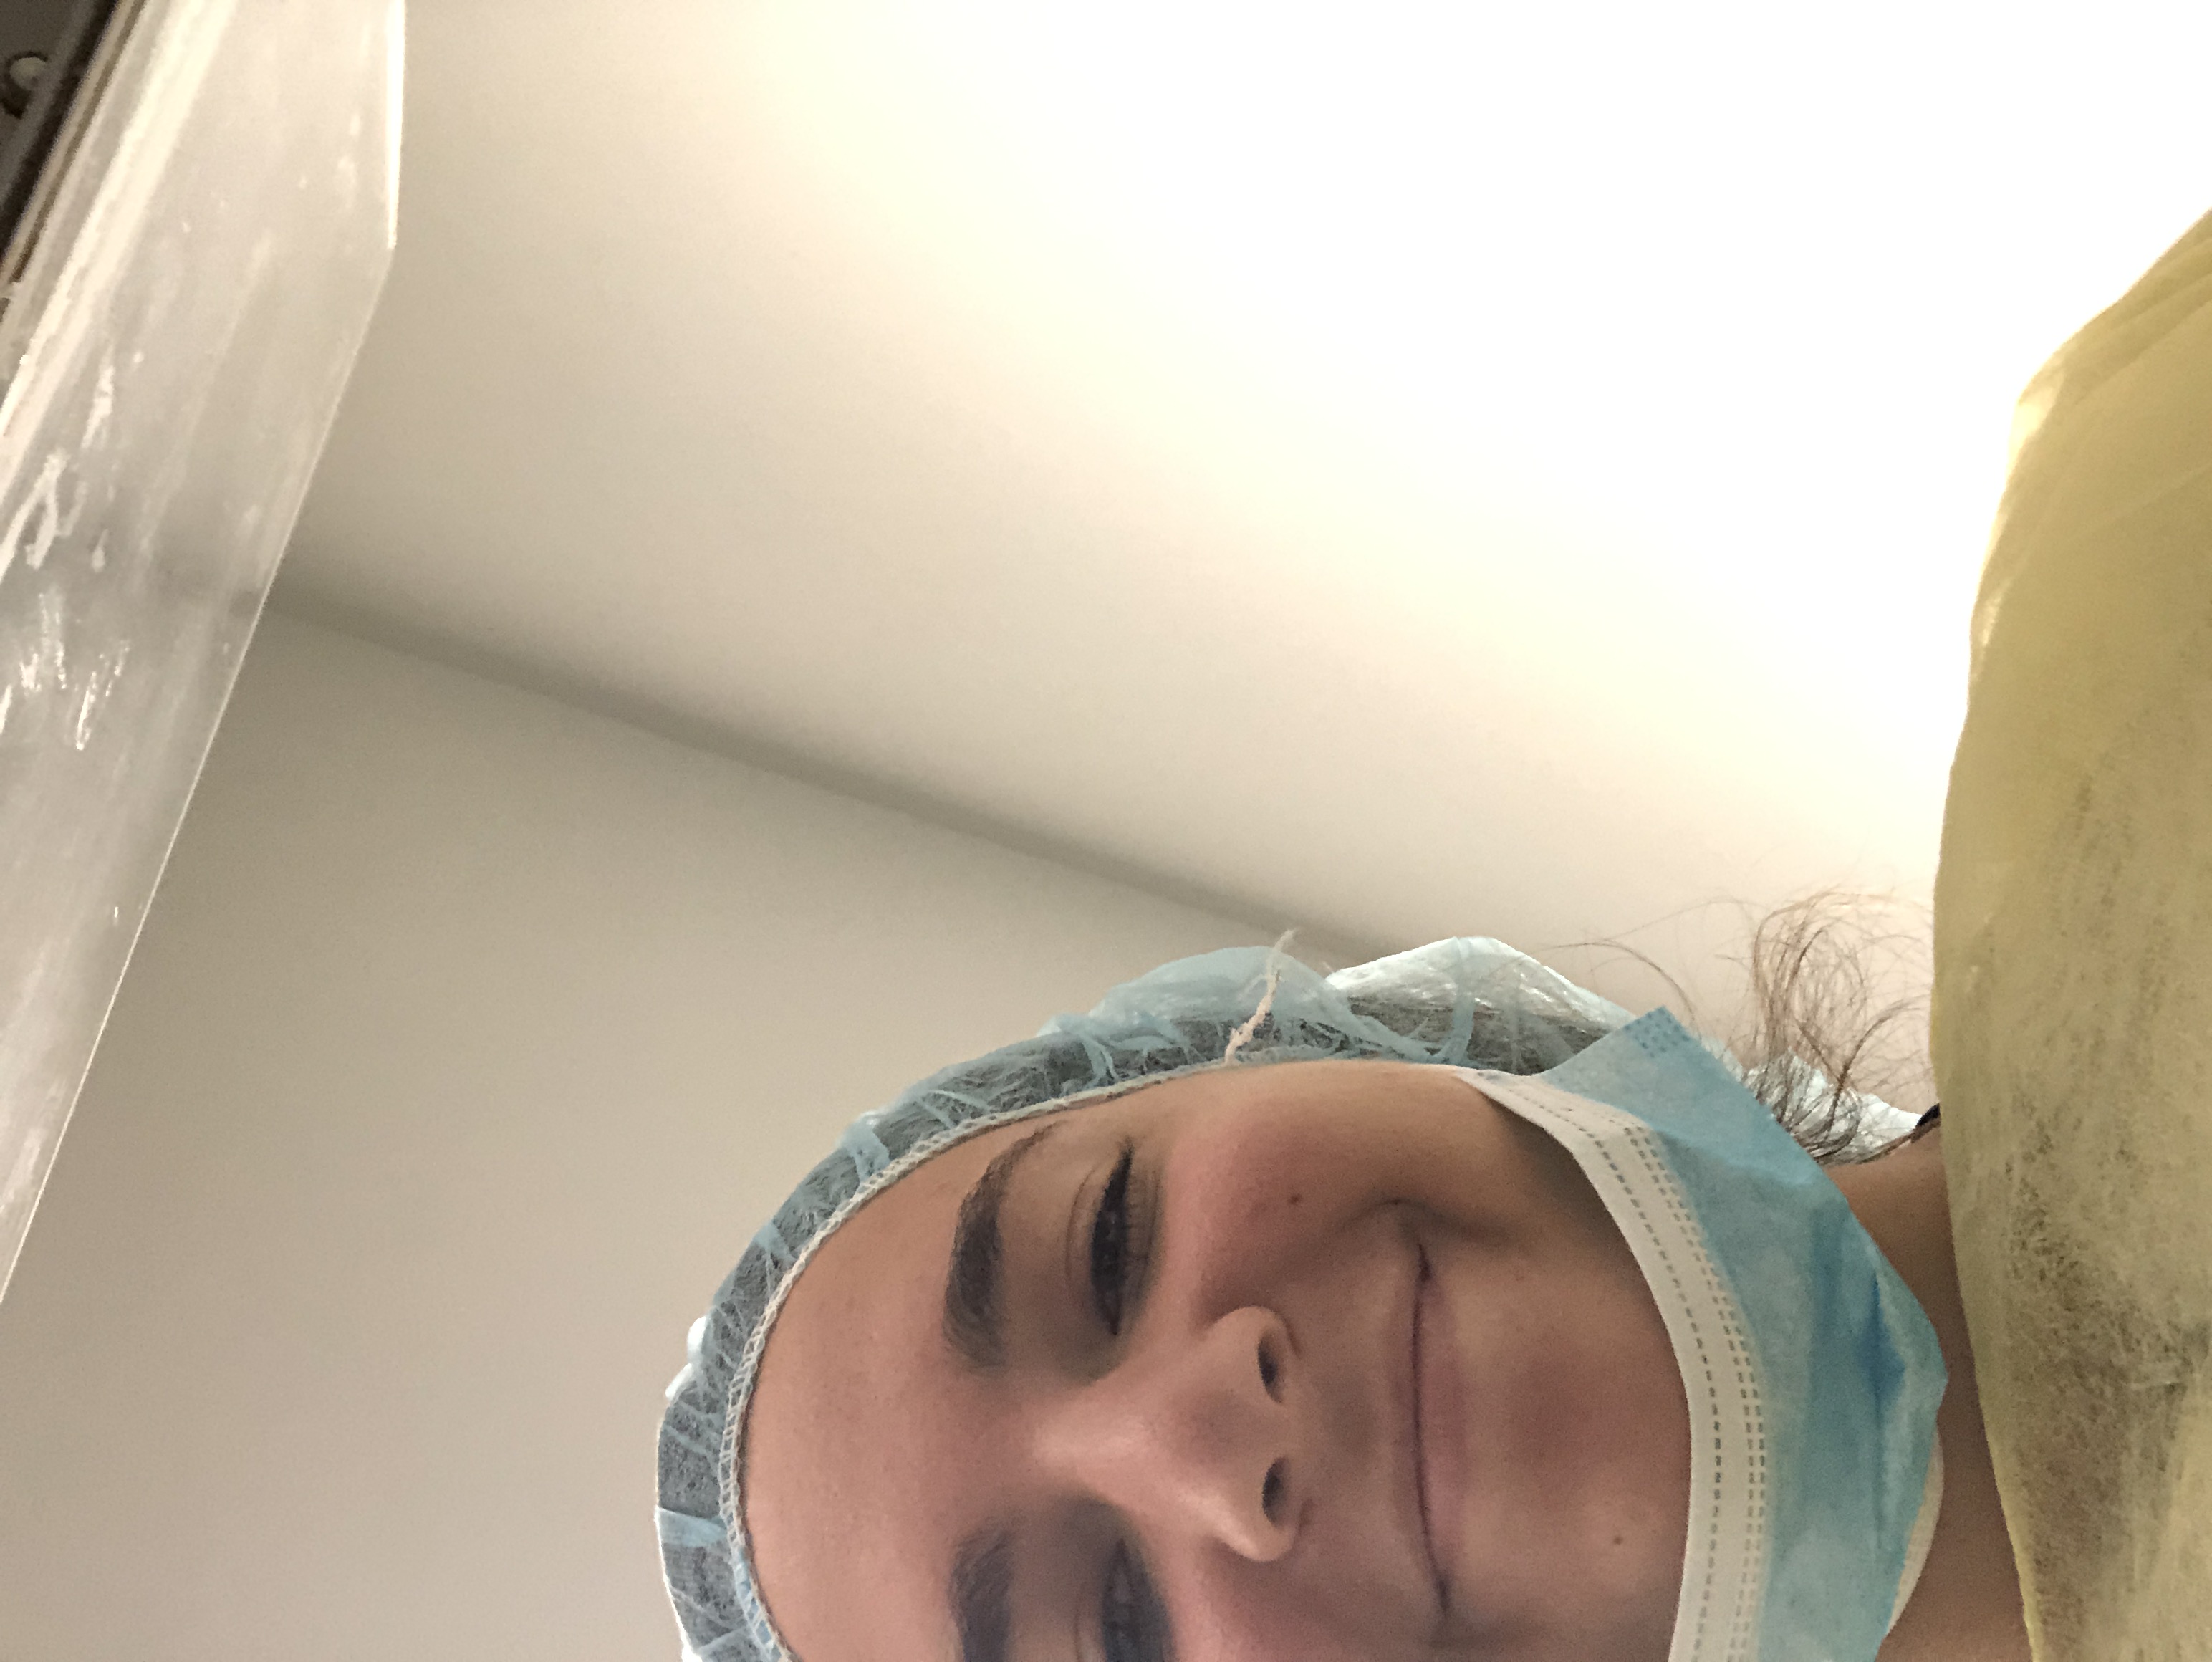 A selfie of Dandeneau in the lab, wearing a protective tarp, a hairnet, and a medical mask momentarily pulled down to show her smile